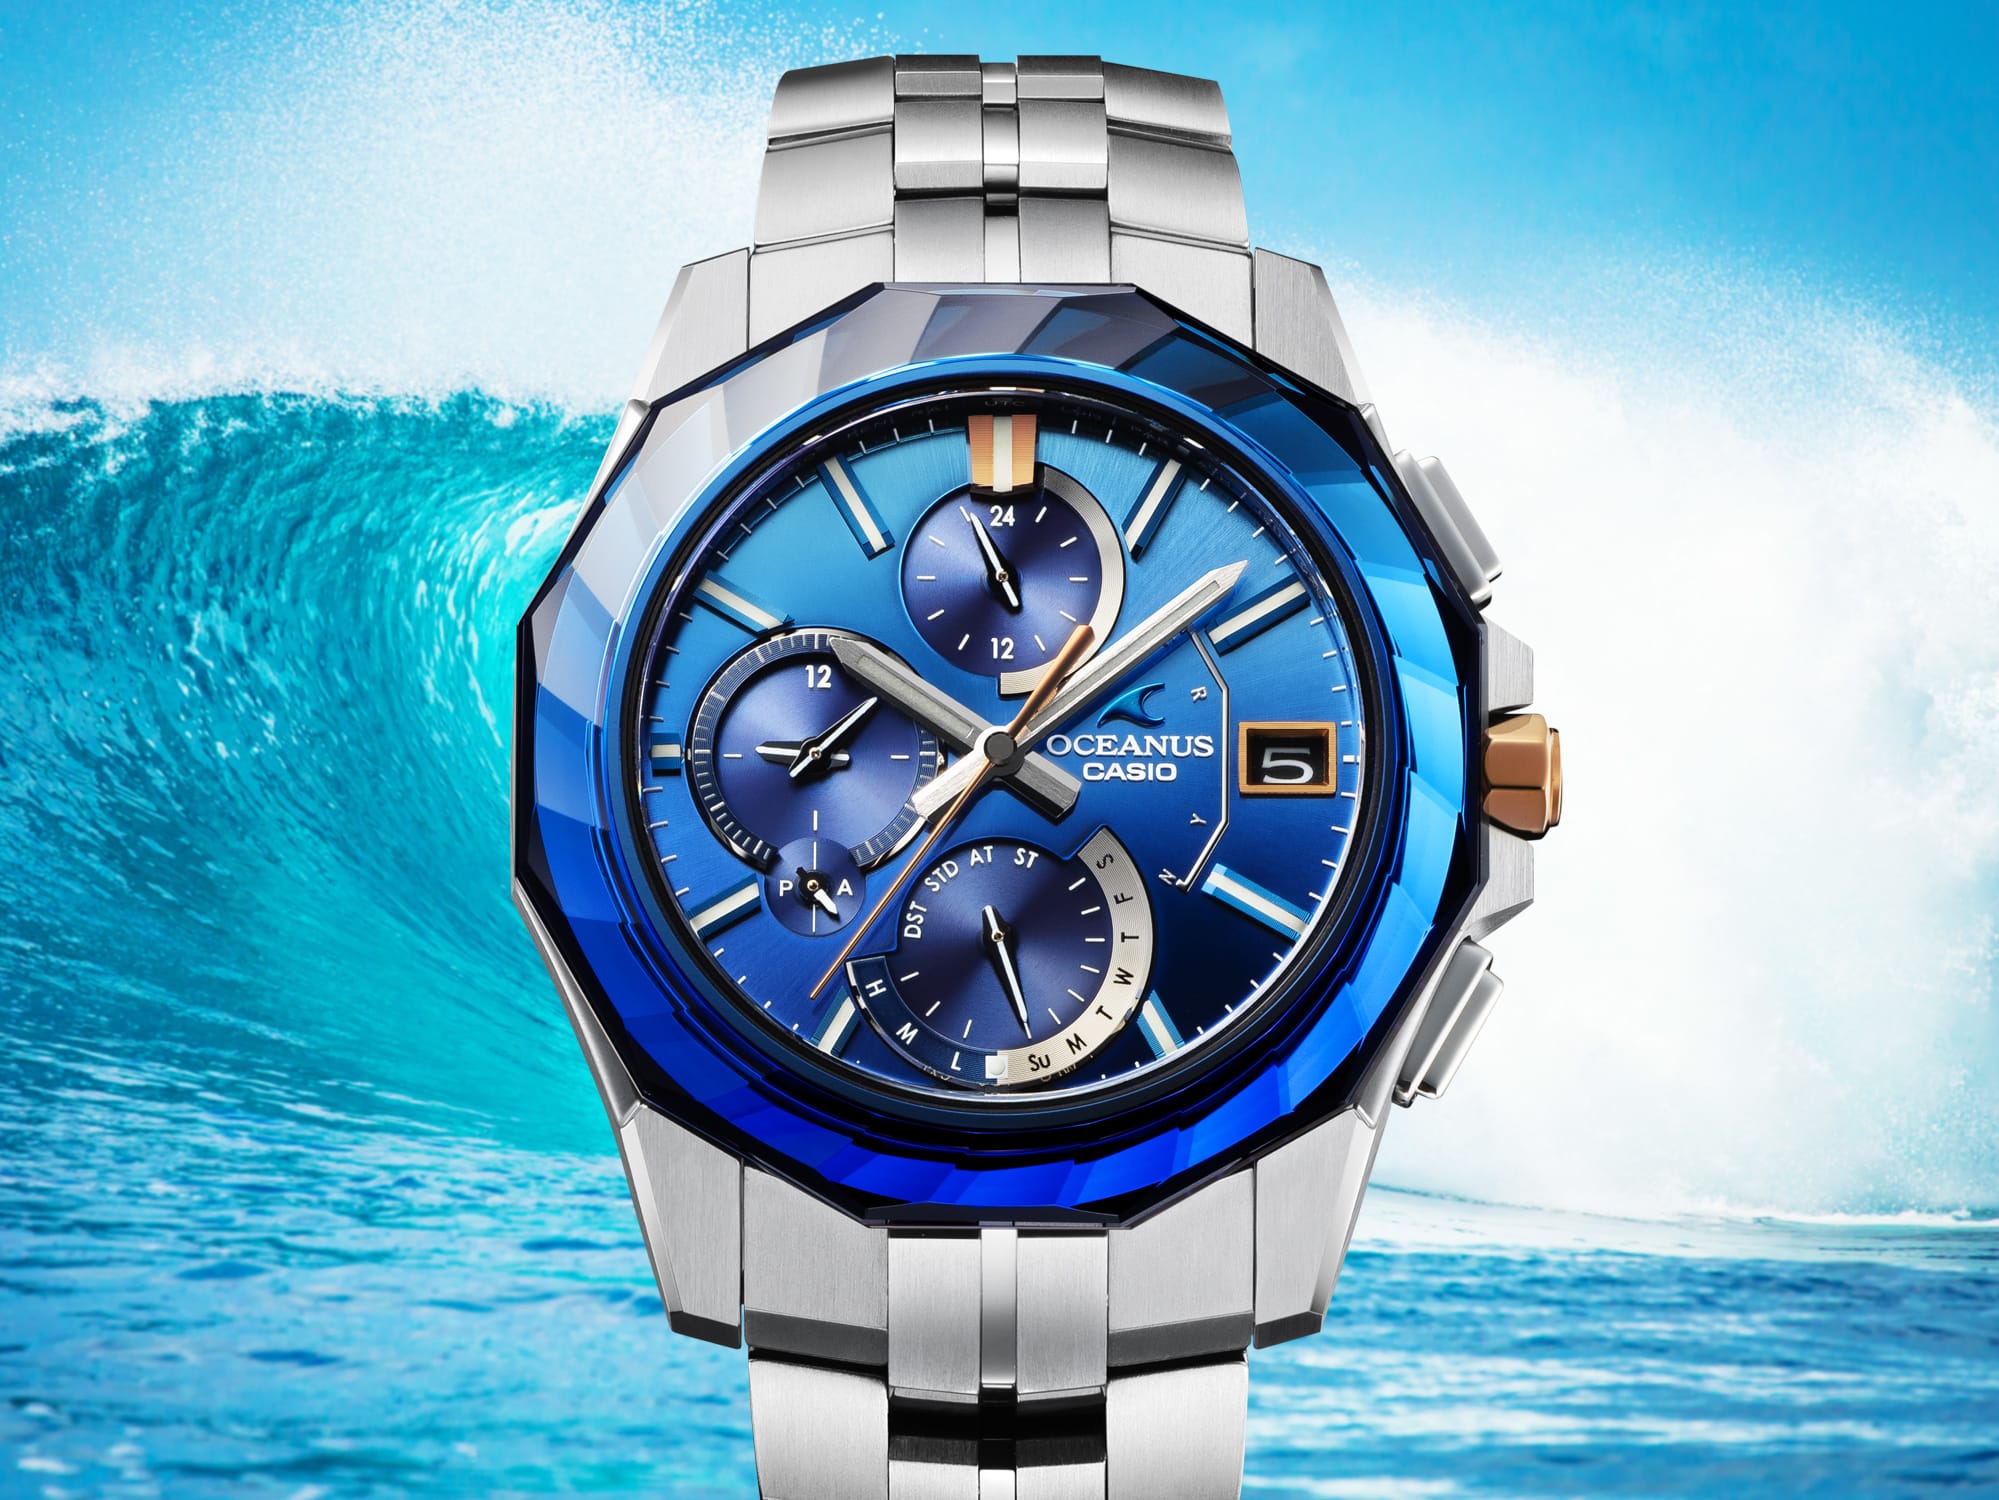 OCEANUS OCWS6000SW-2A Analog watch with blue face and bezel in front of a wave